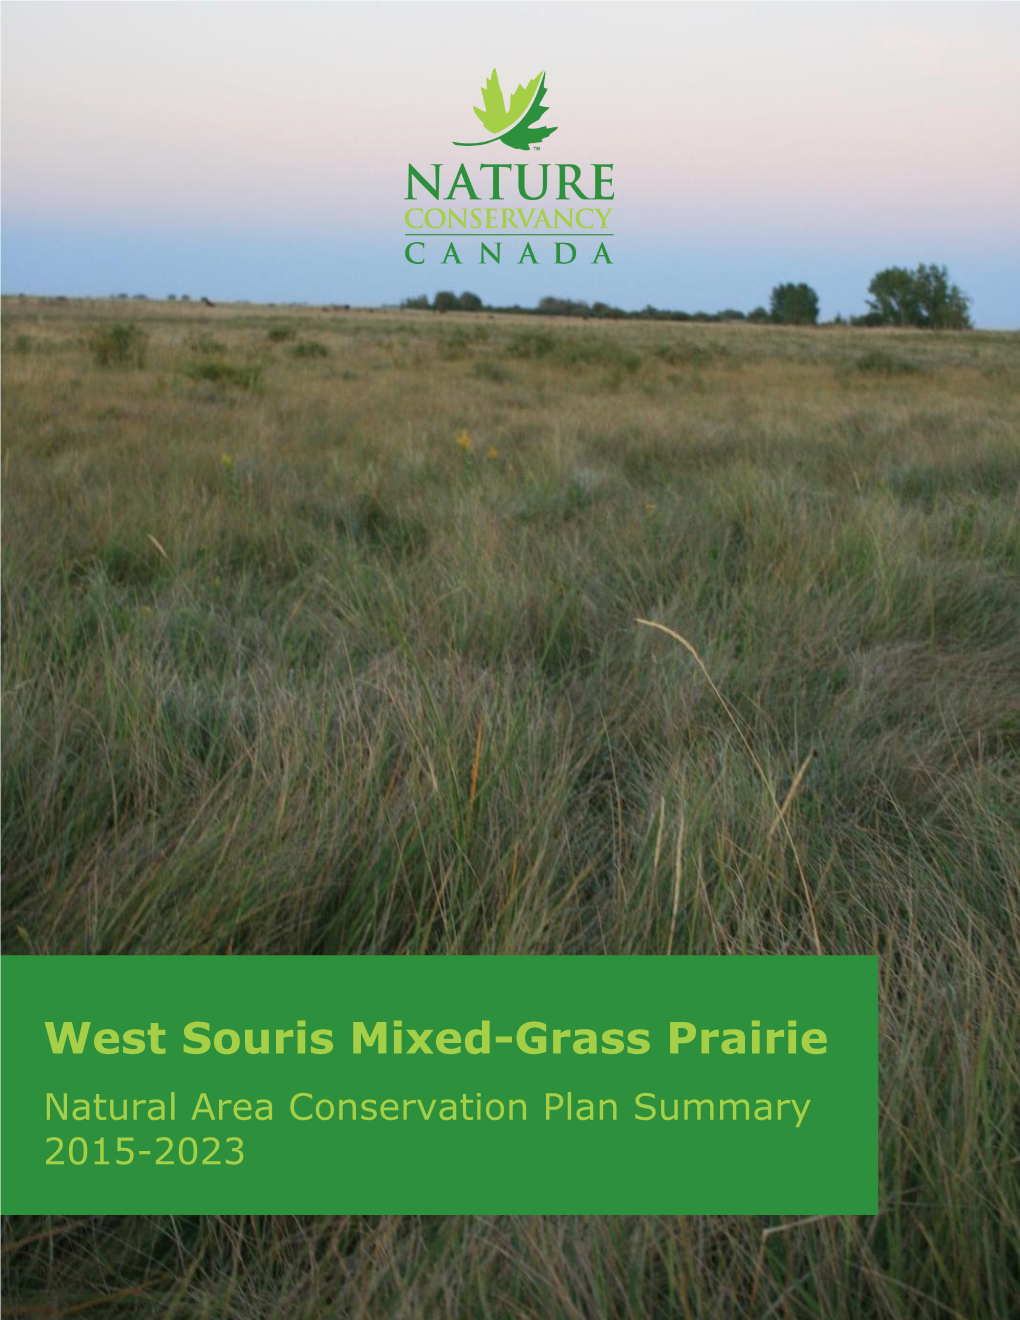 West Souris Mixed-Grass Prairie Natural Area Conservation Plan Summary